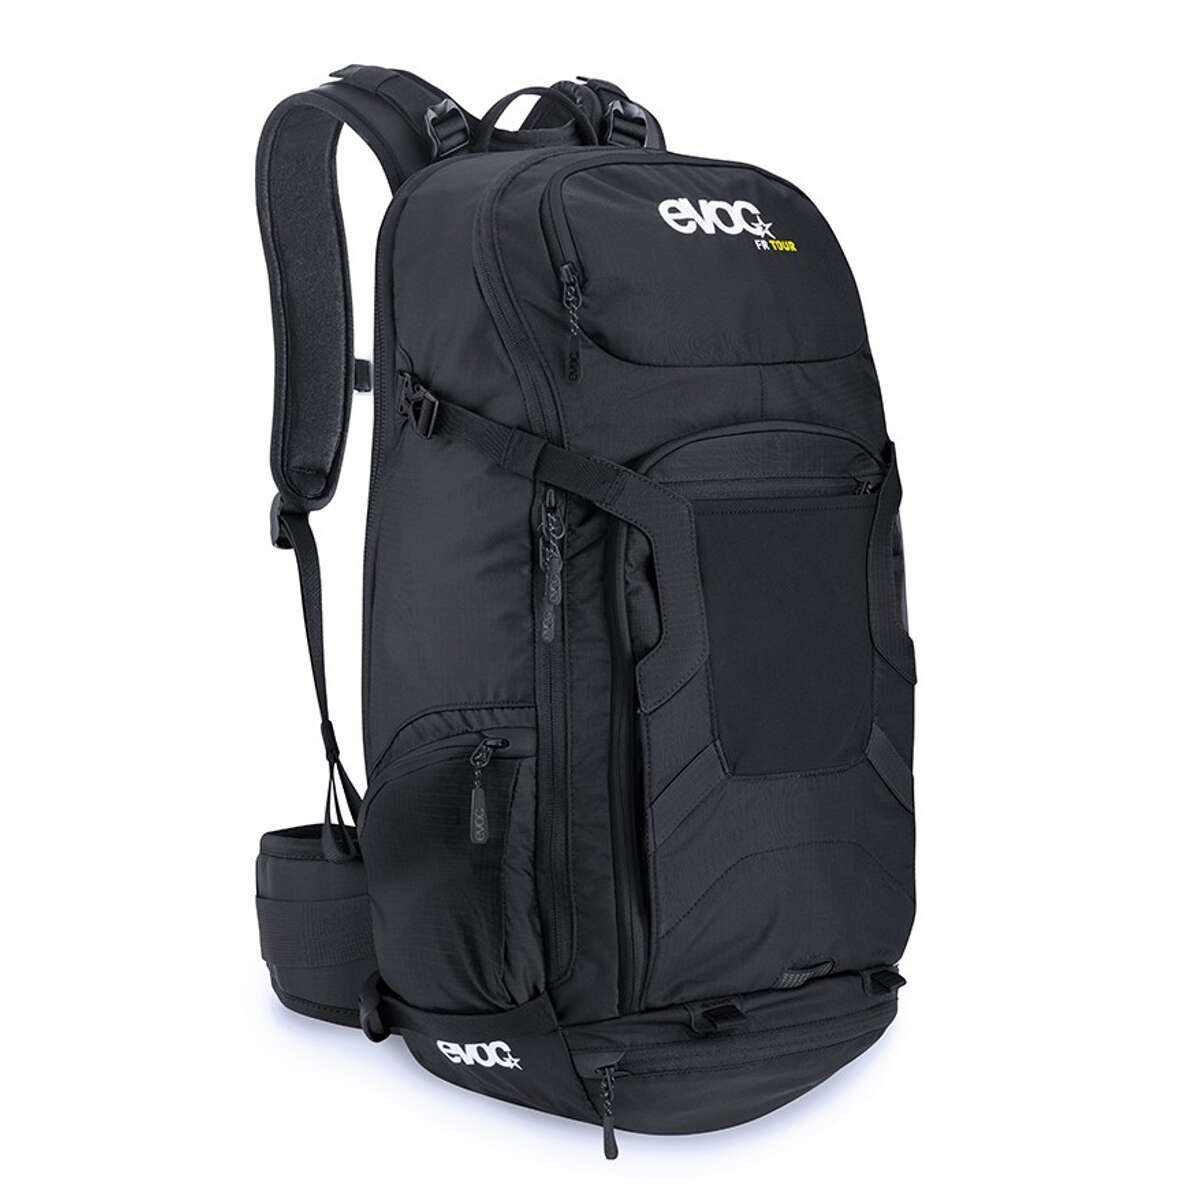 Evoc Protektor Backpack with Hydration System Compartment FR Tour 30 30L - Black